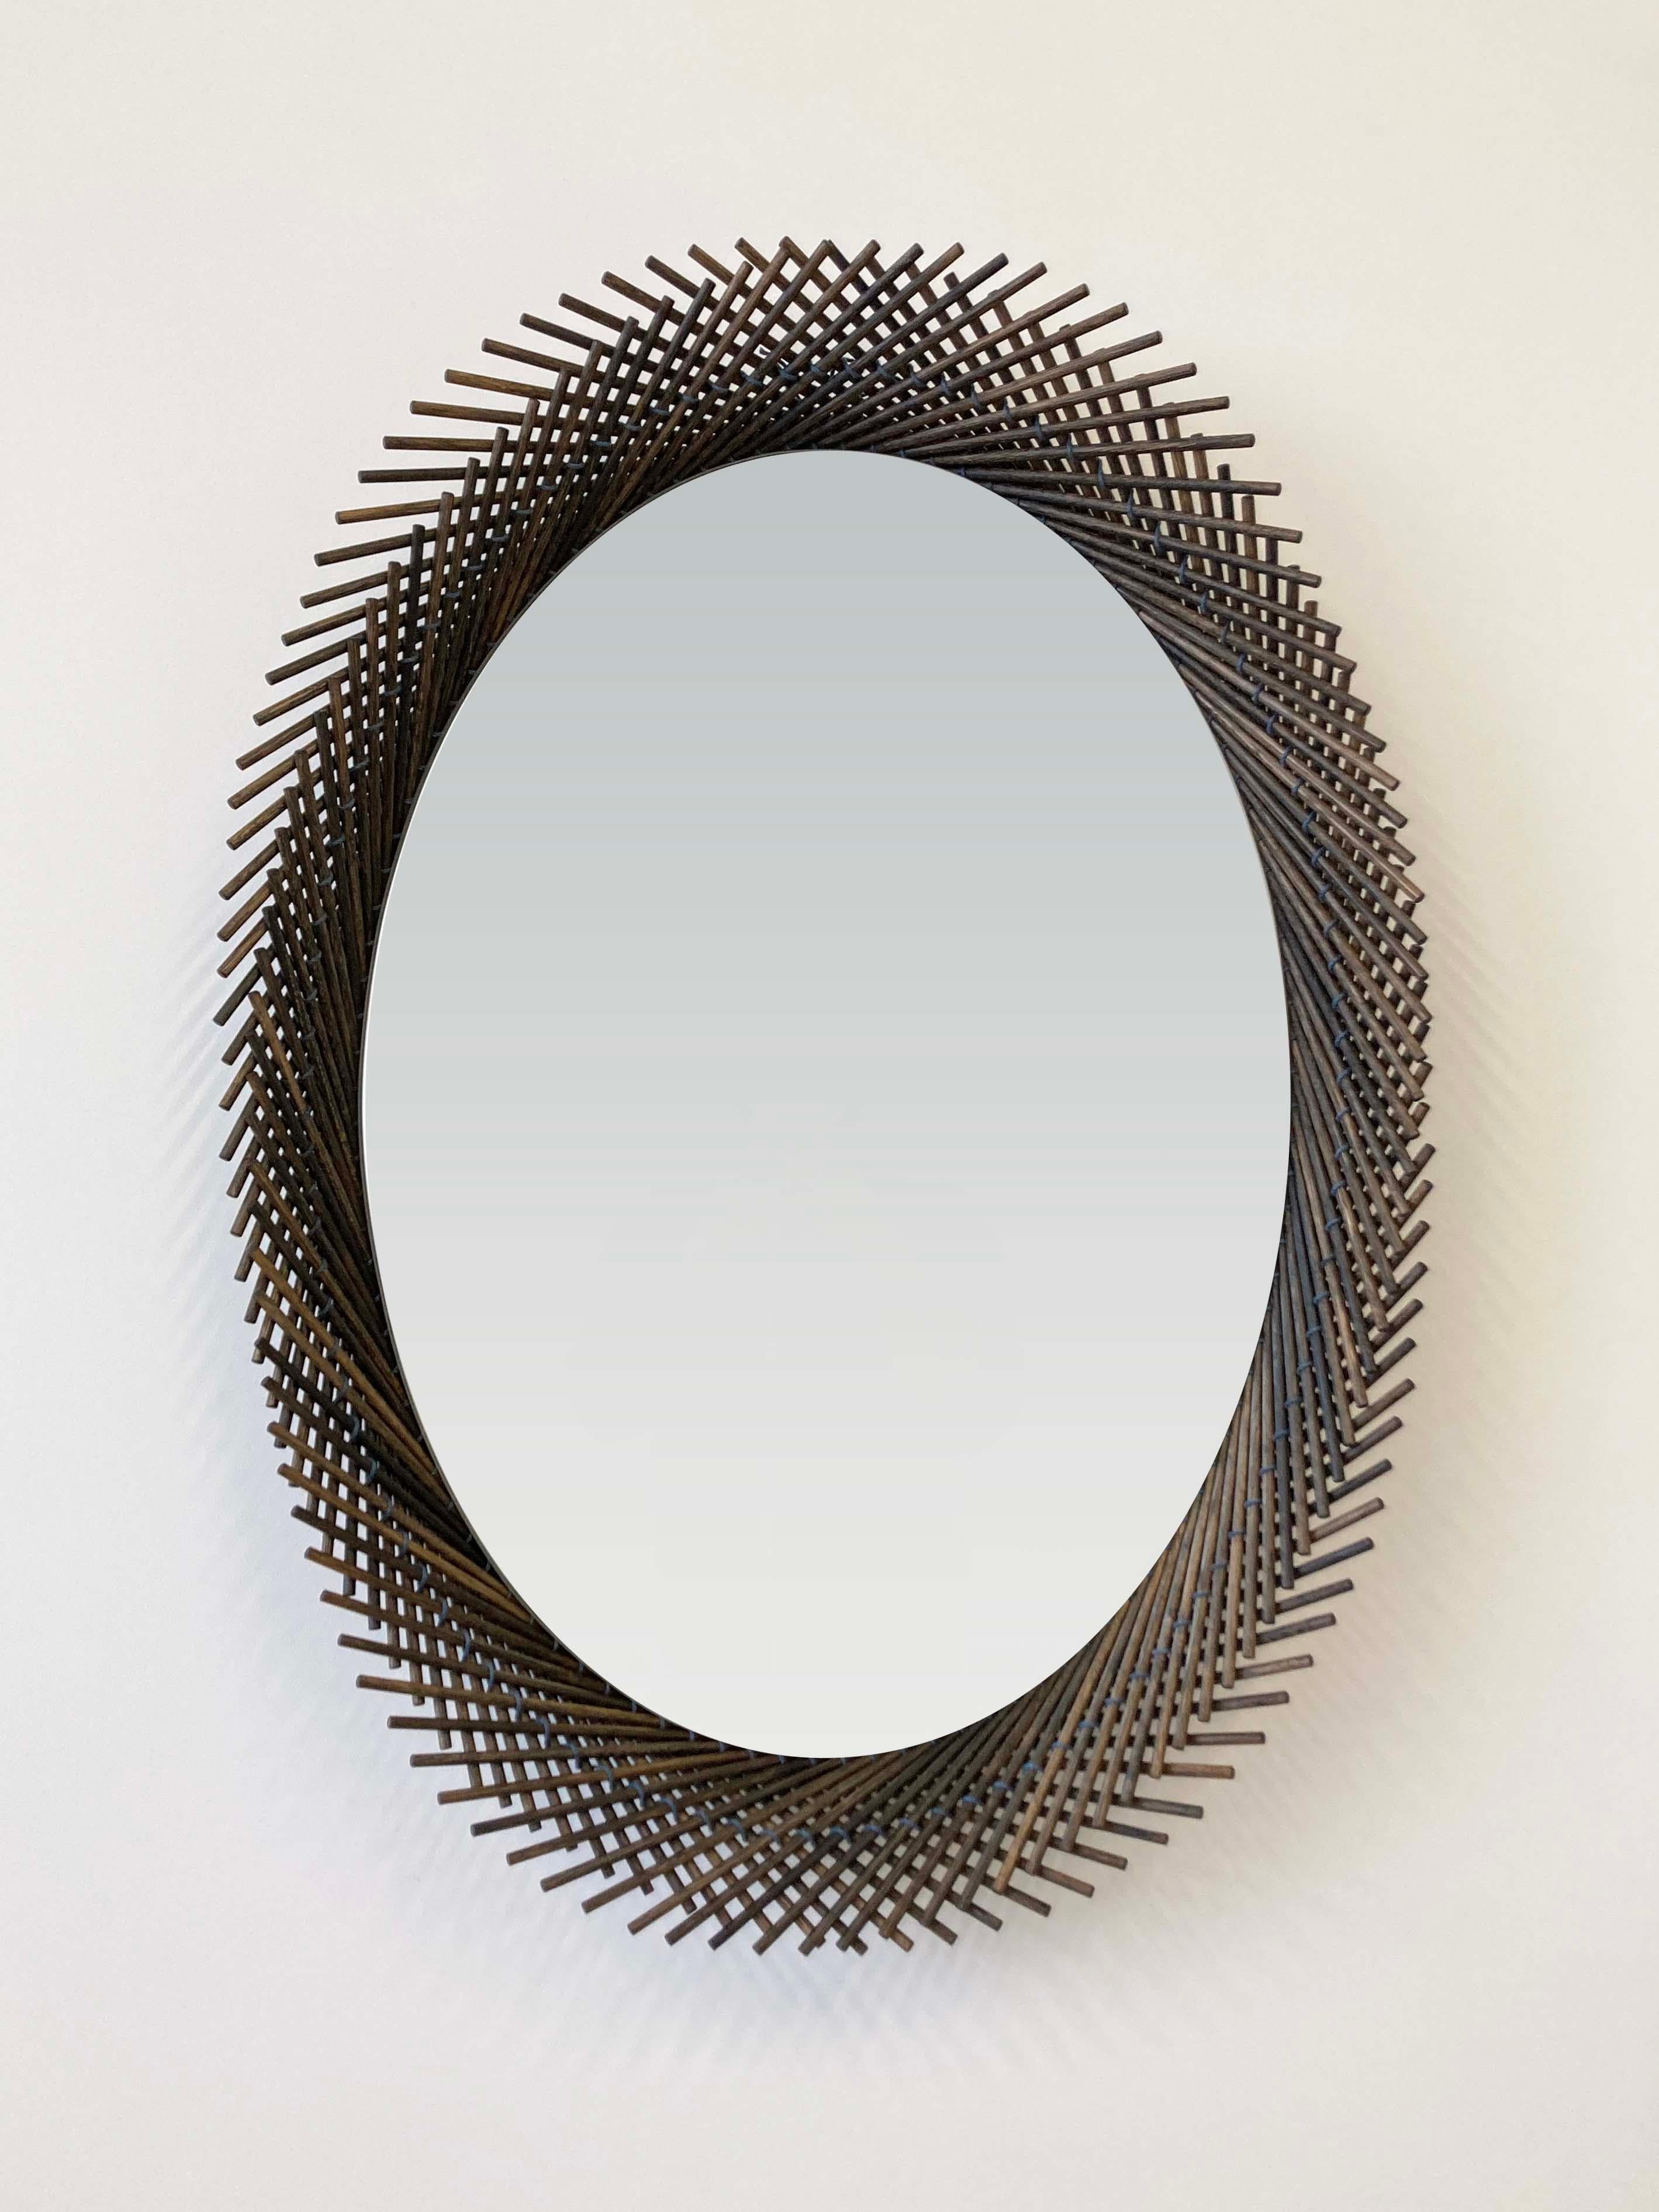 The Mooda Oval Mirror pushes the strict geometry that occurs as a result of stitching the dowels together to create a dynamic edge. Each layer of the Mooda rises and falls inversely to the other as they travel along the circumference of the mirror,